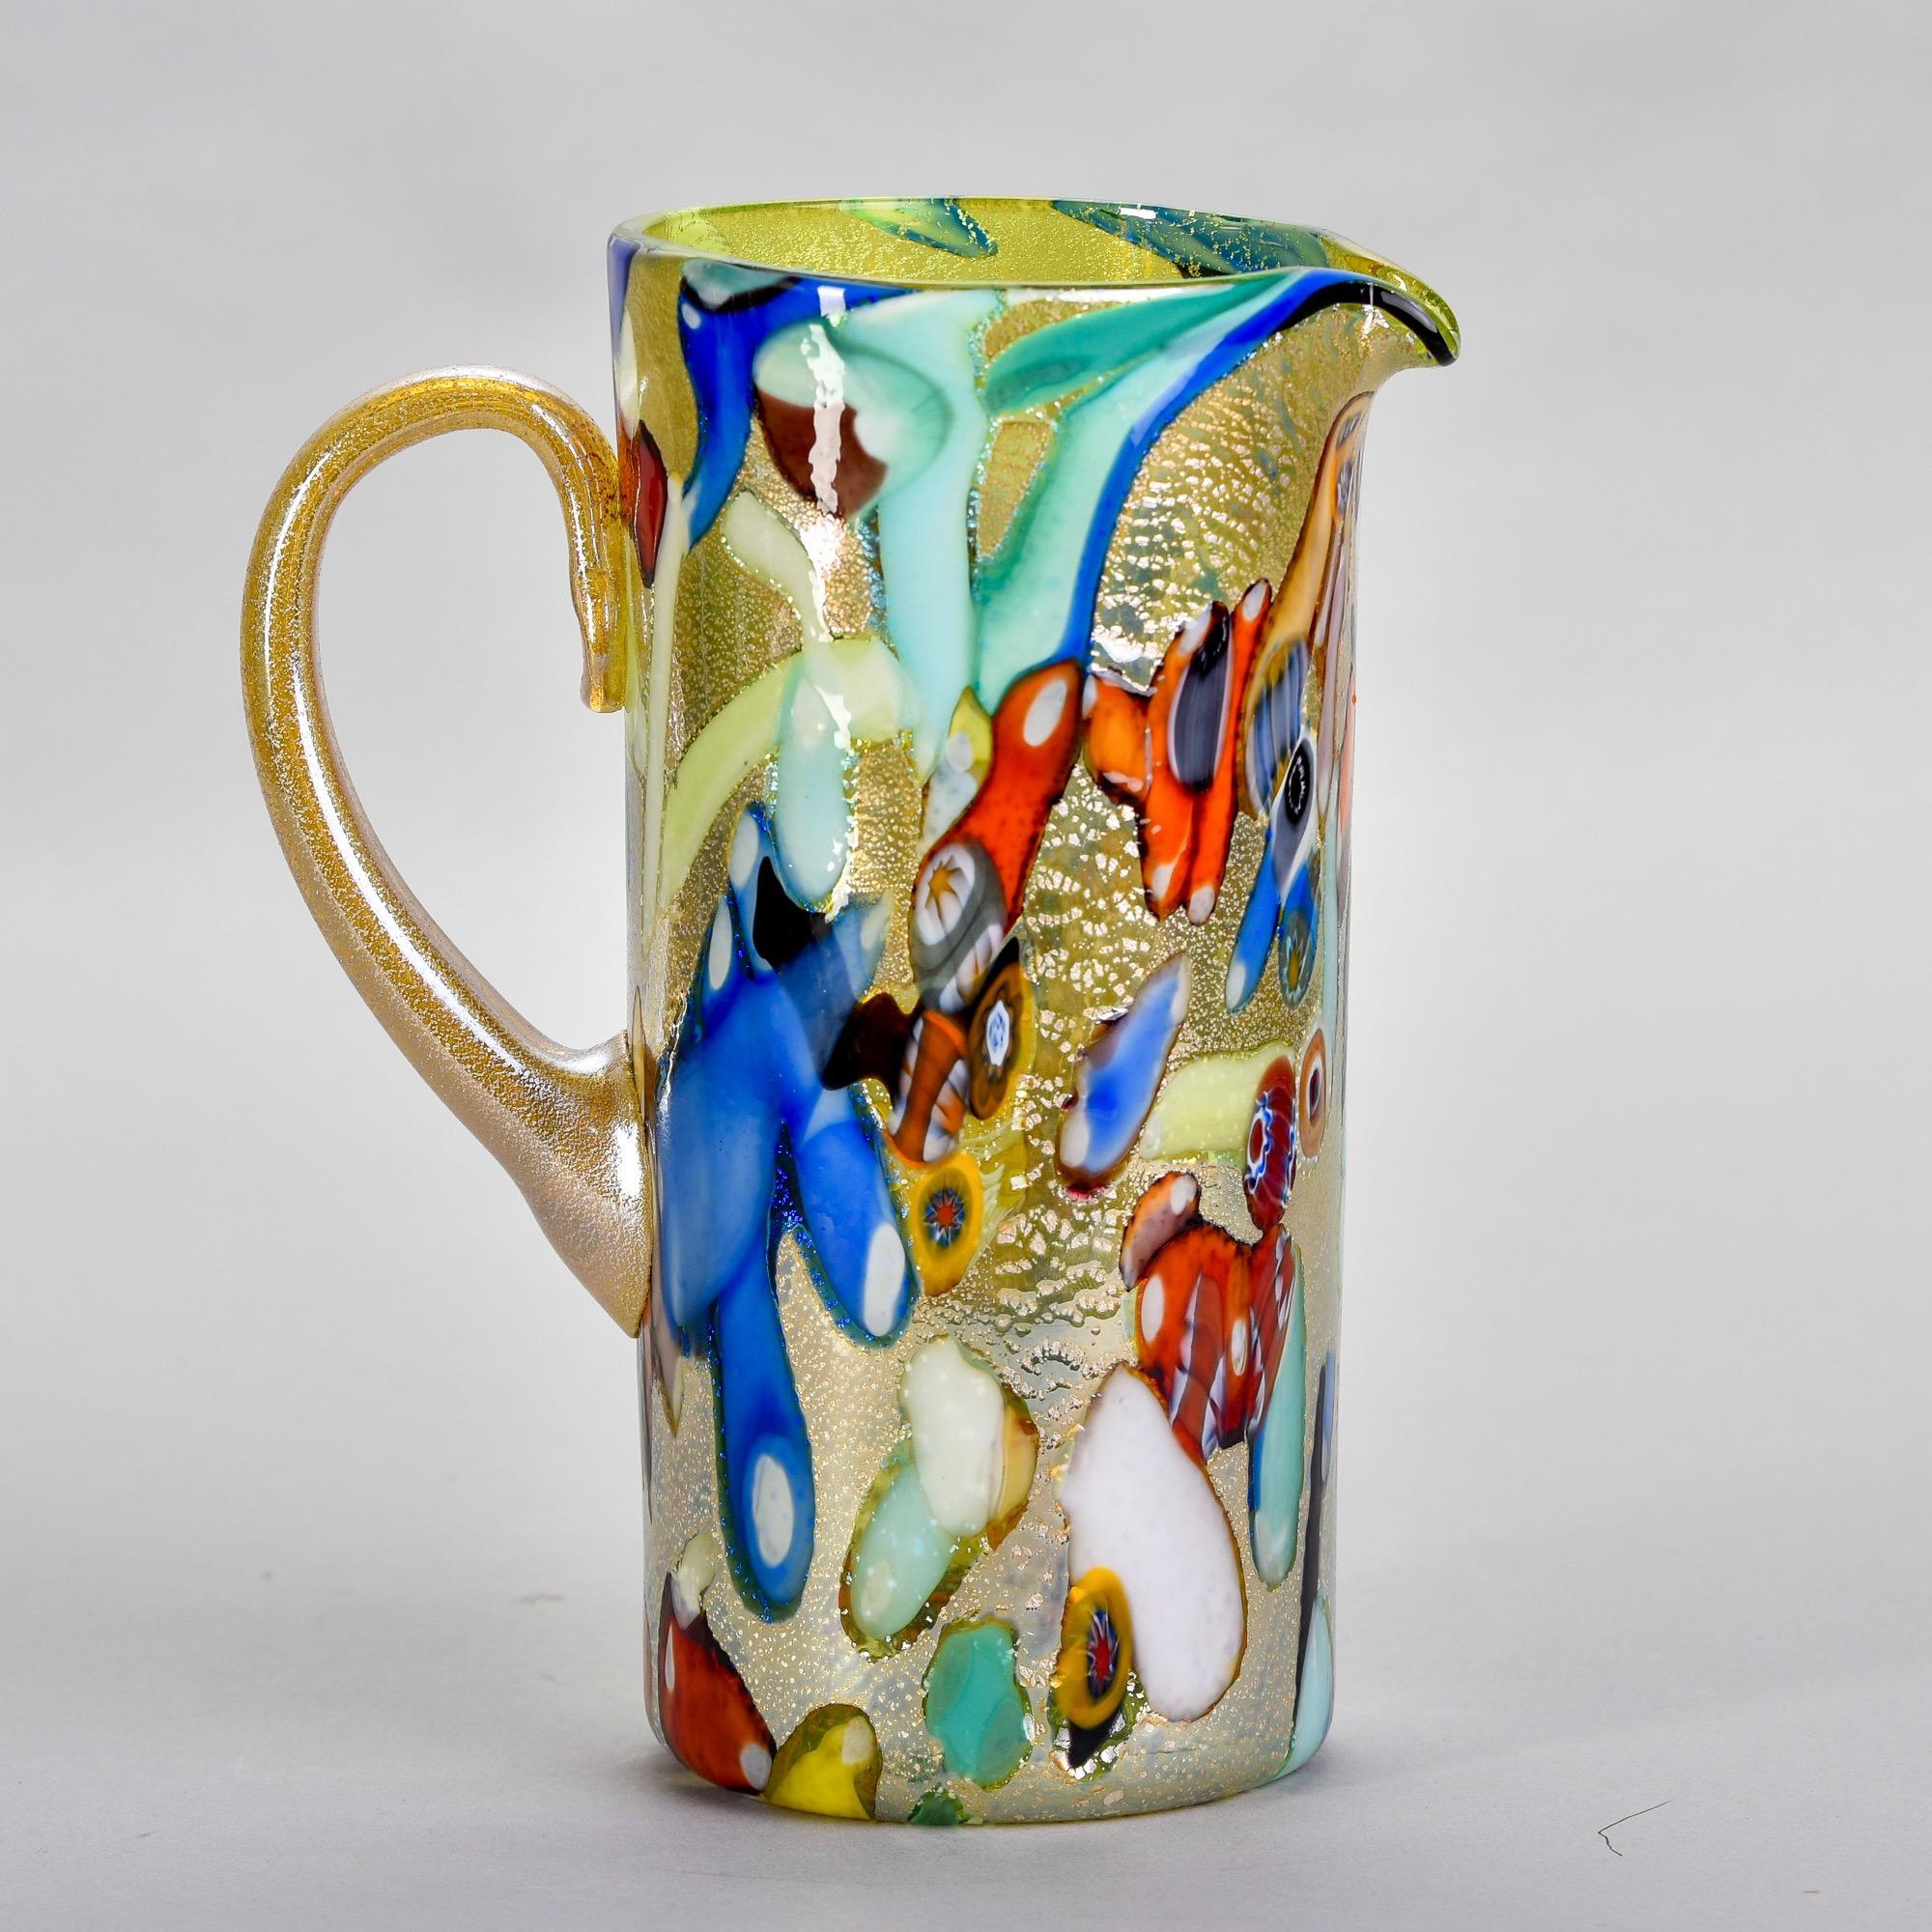 Found in Italy, this new Murano glass pitcher has an iridescent pale green gold body with multi color splatters, streaks and some scattered murrine flowers. Unknown maker. Versatile, decorative vessel than can be used as a vase or as intended.